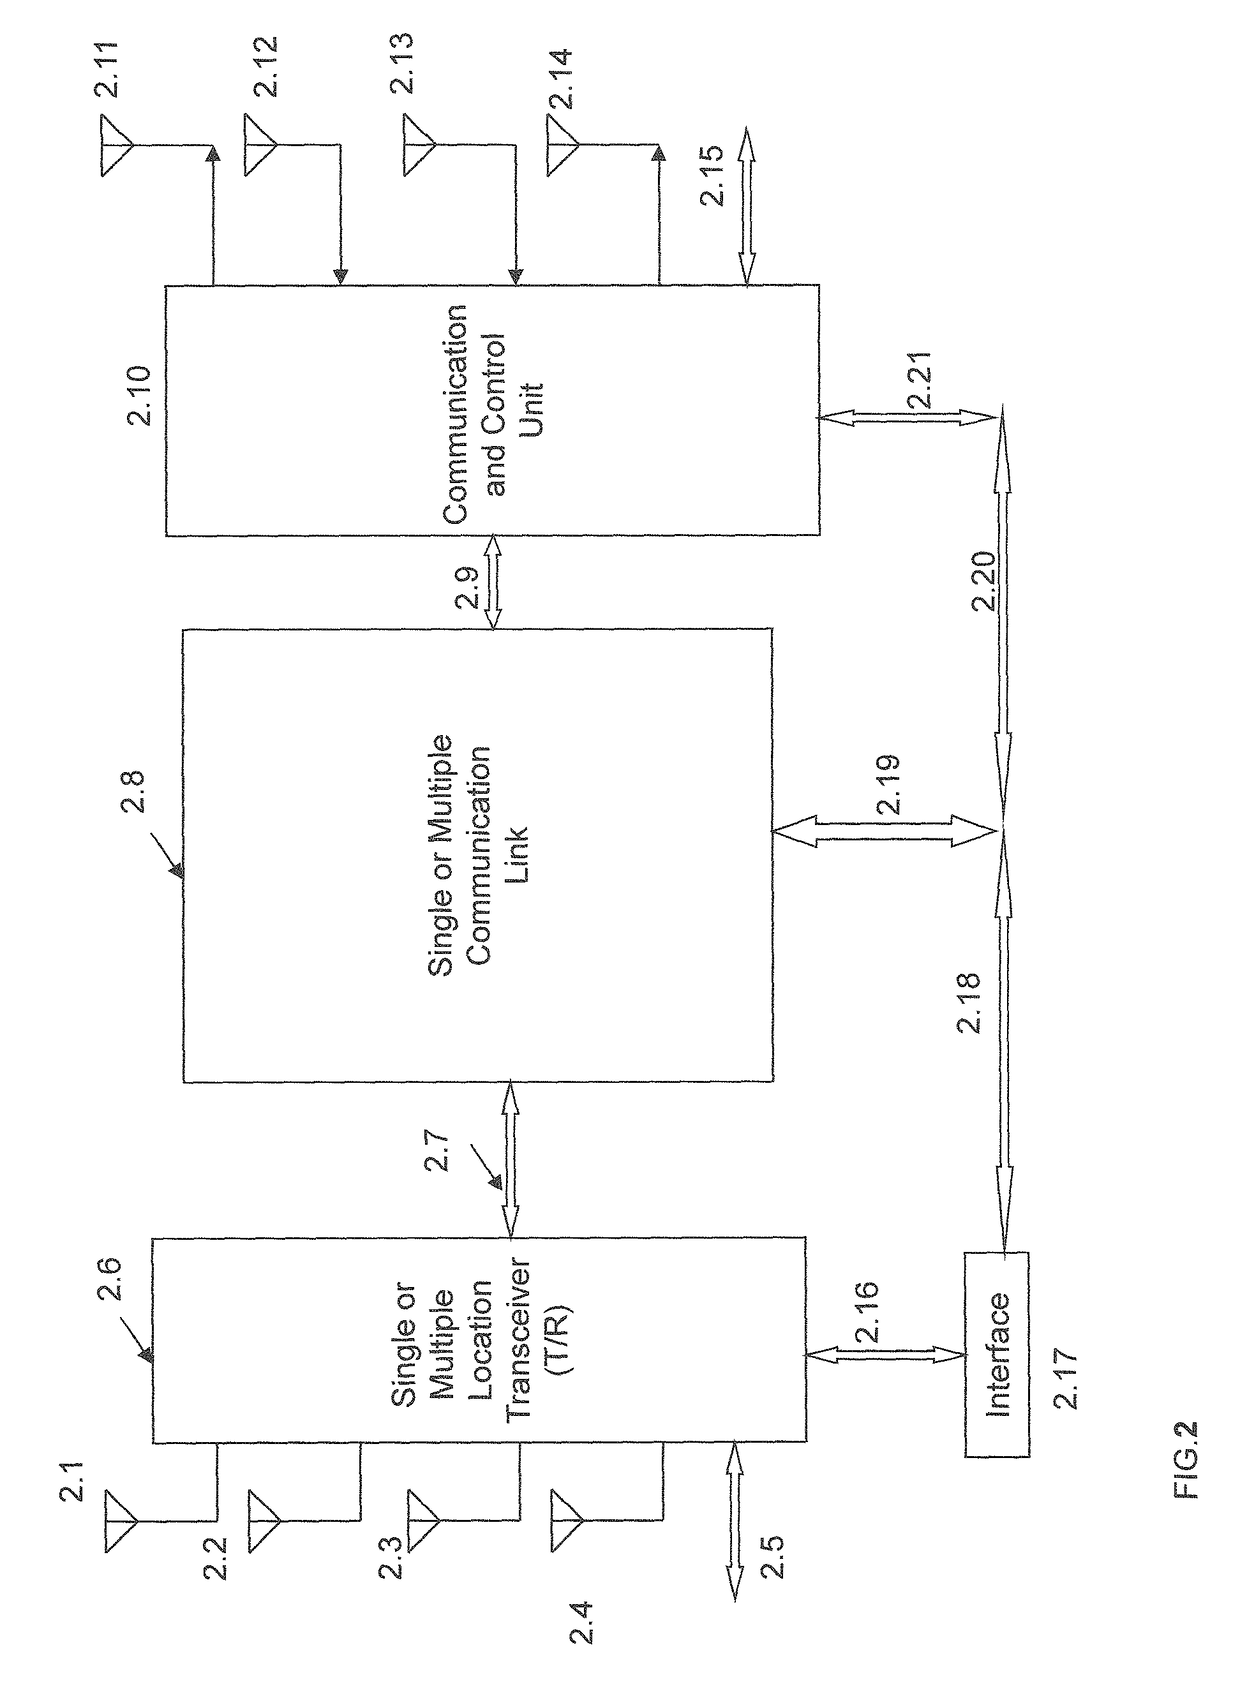 Heart rate sensor and medical diagnostics wireless devices